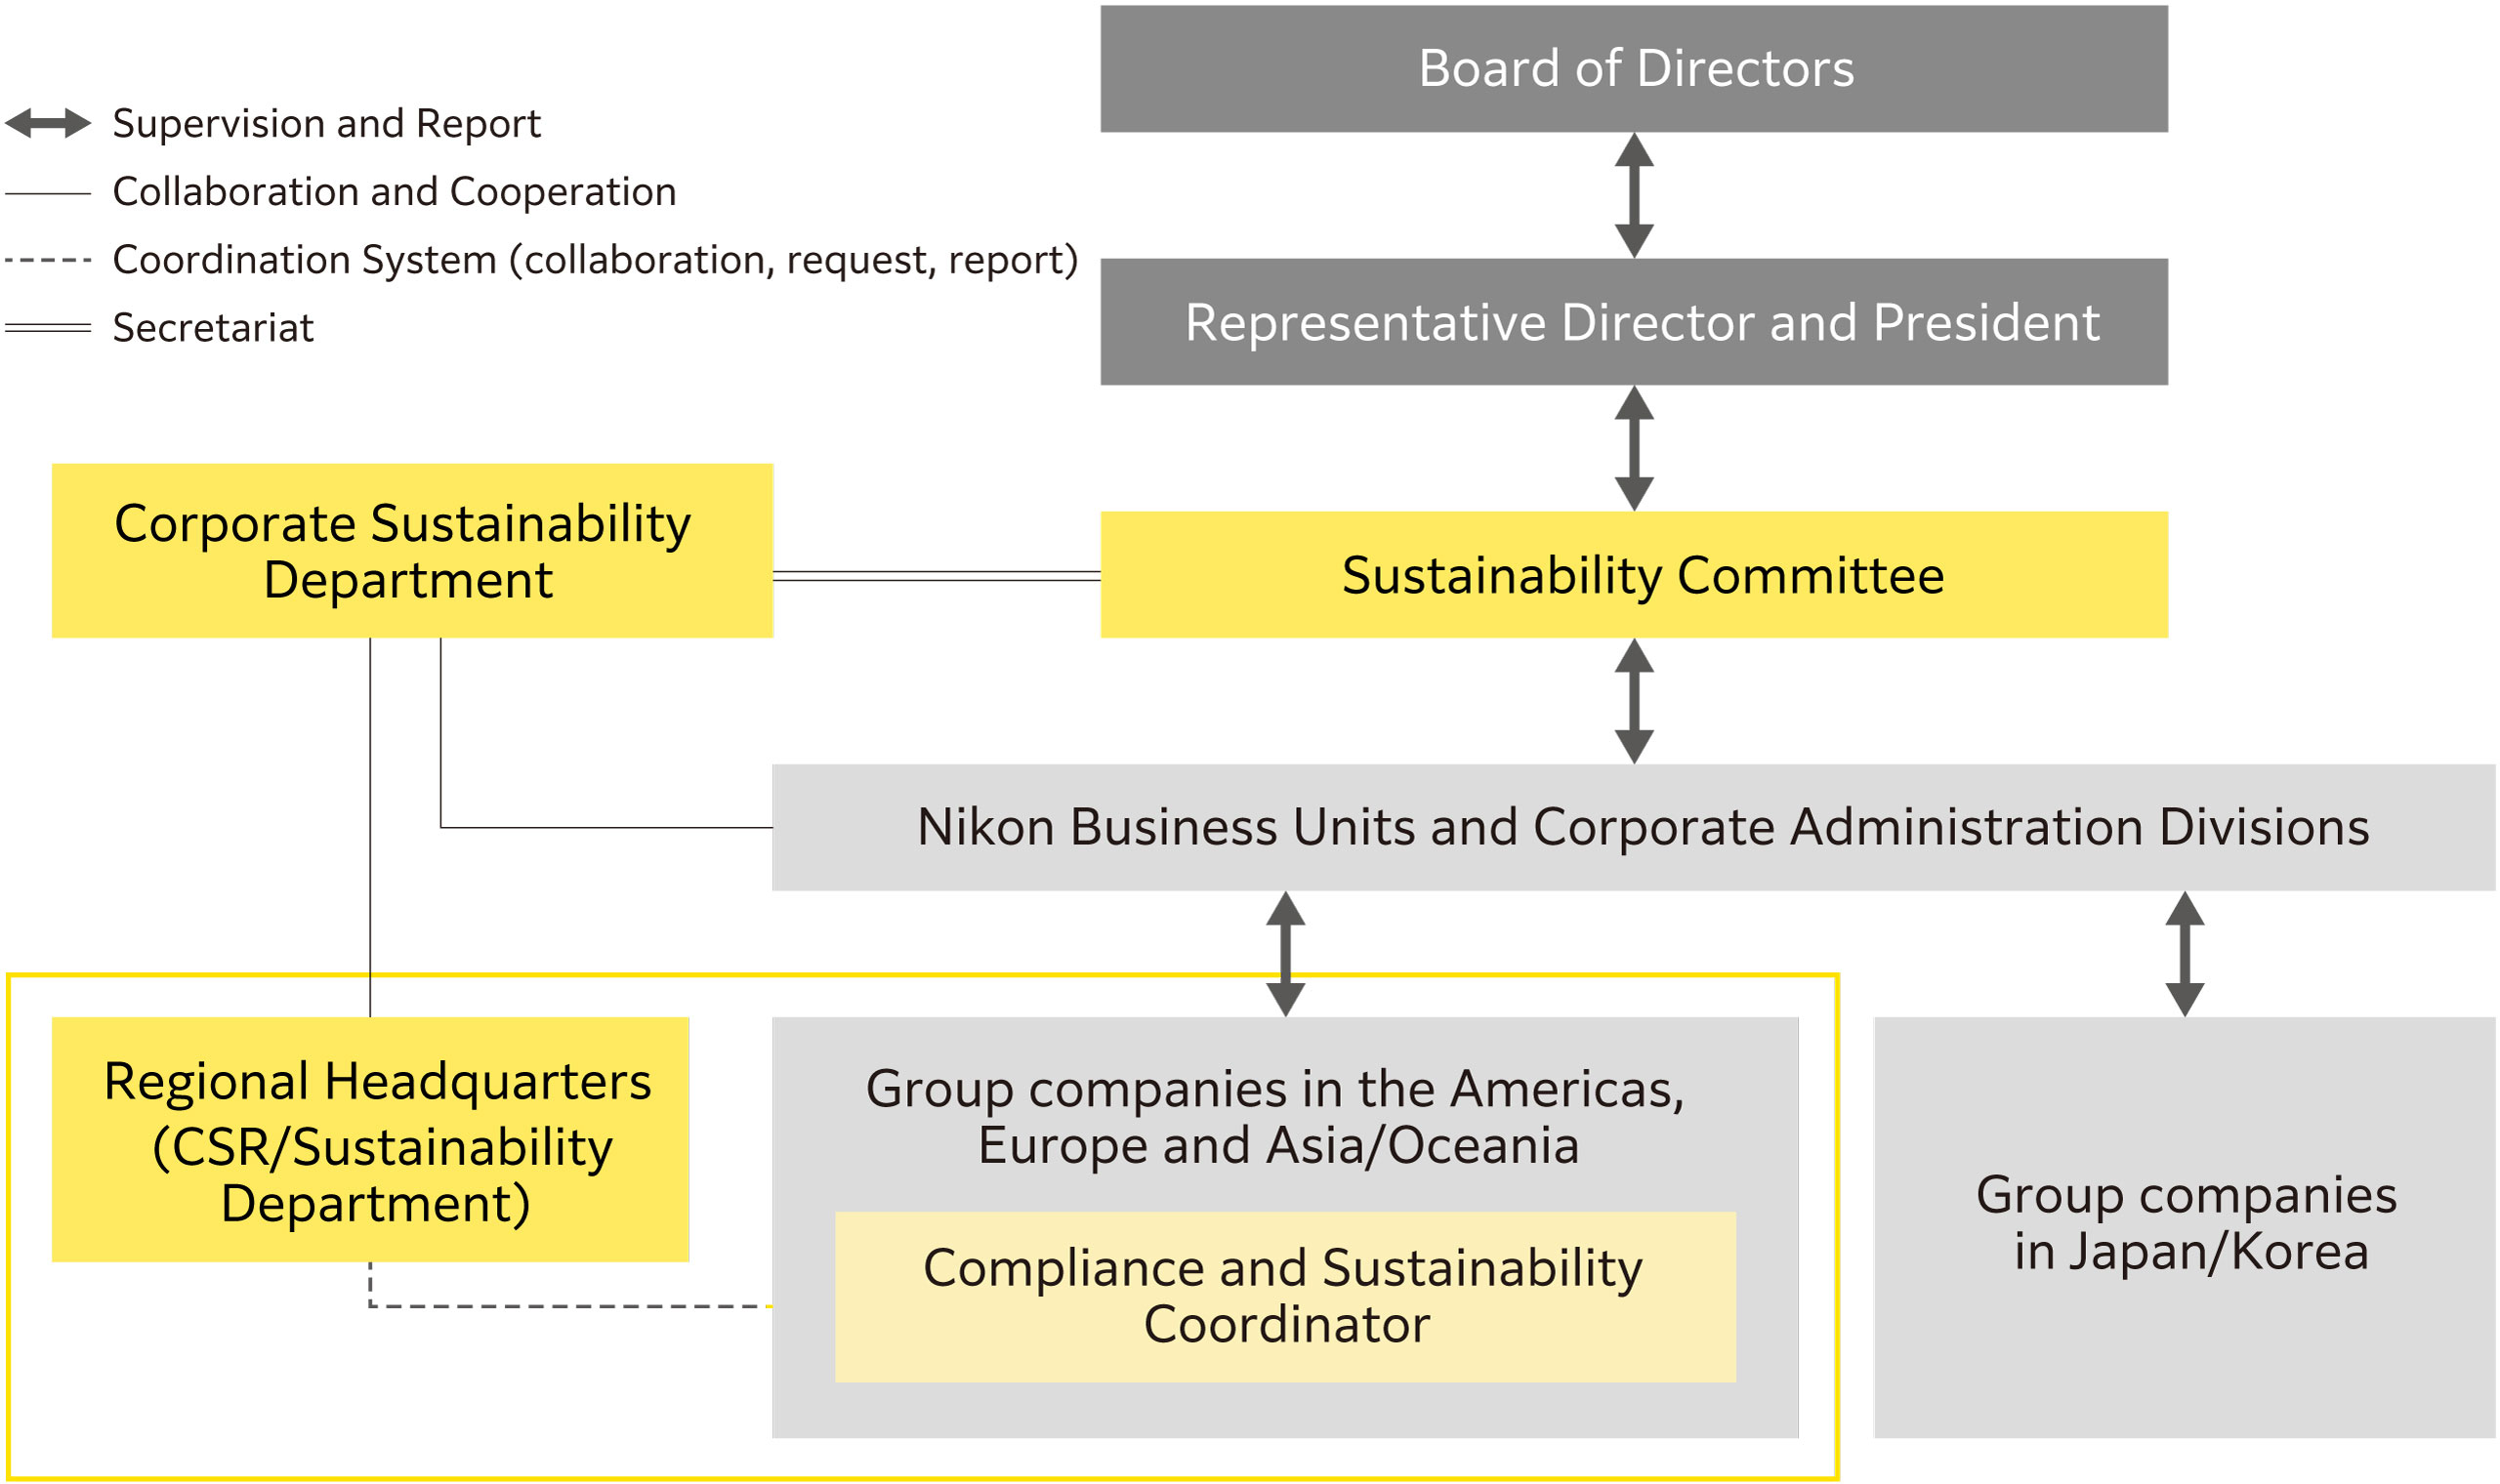 The Board of Directors, President, Sustainability Committee, Nikon Business Units and Corporate Administration Divisions, Group companies in the Americas, Europe, Asia/Oceania (Compliance and Sustainability Coordinators), and group companies in Japan/Korea engage in supervision and reporting. The Corporate Sustainability Department and the Sustainability Committee share a secretariat, while the Corporate Sustainability Department and Nikon Business Units, Corporate Administration Divisions, and Regional Headquarters (CSR/Sustainability Department) collaborate and cooperate. Regional Headquarters (CSR/Sustainability Department) and Group companies in the Americas, Europe, and Asia/Oceania (Compliance and Sustainability Coordinators) maintain relationships under a Coordination system (collaborate, request, report).